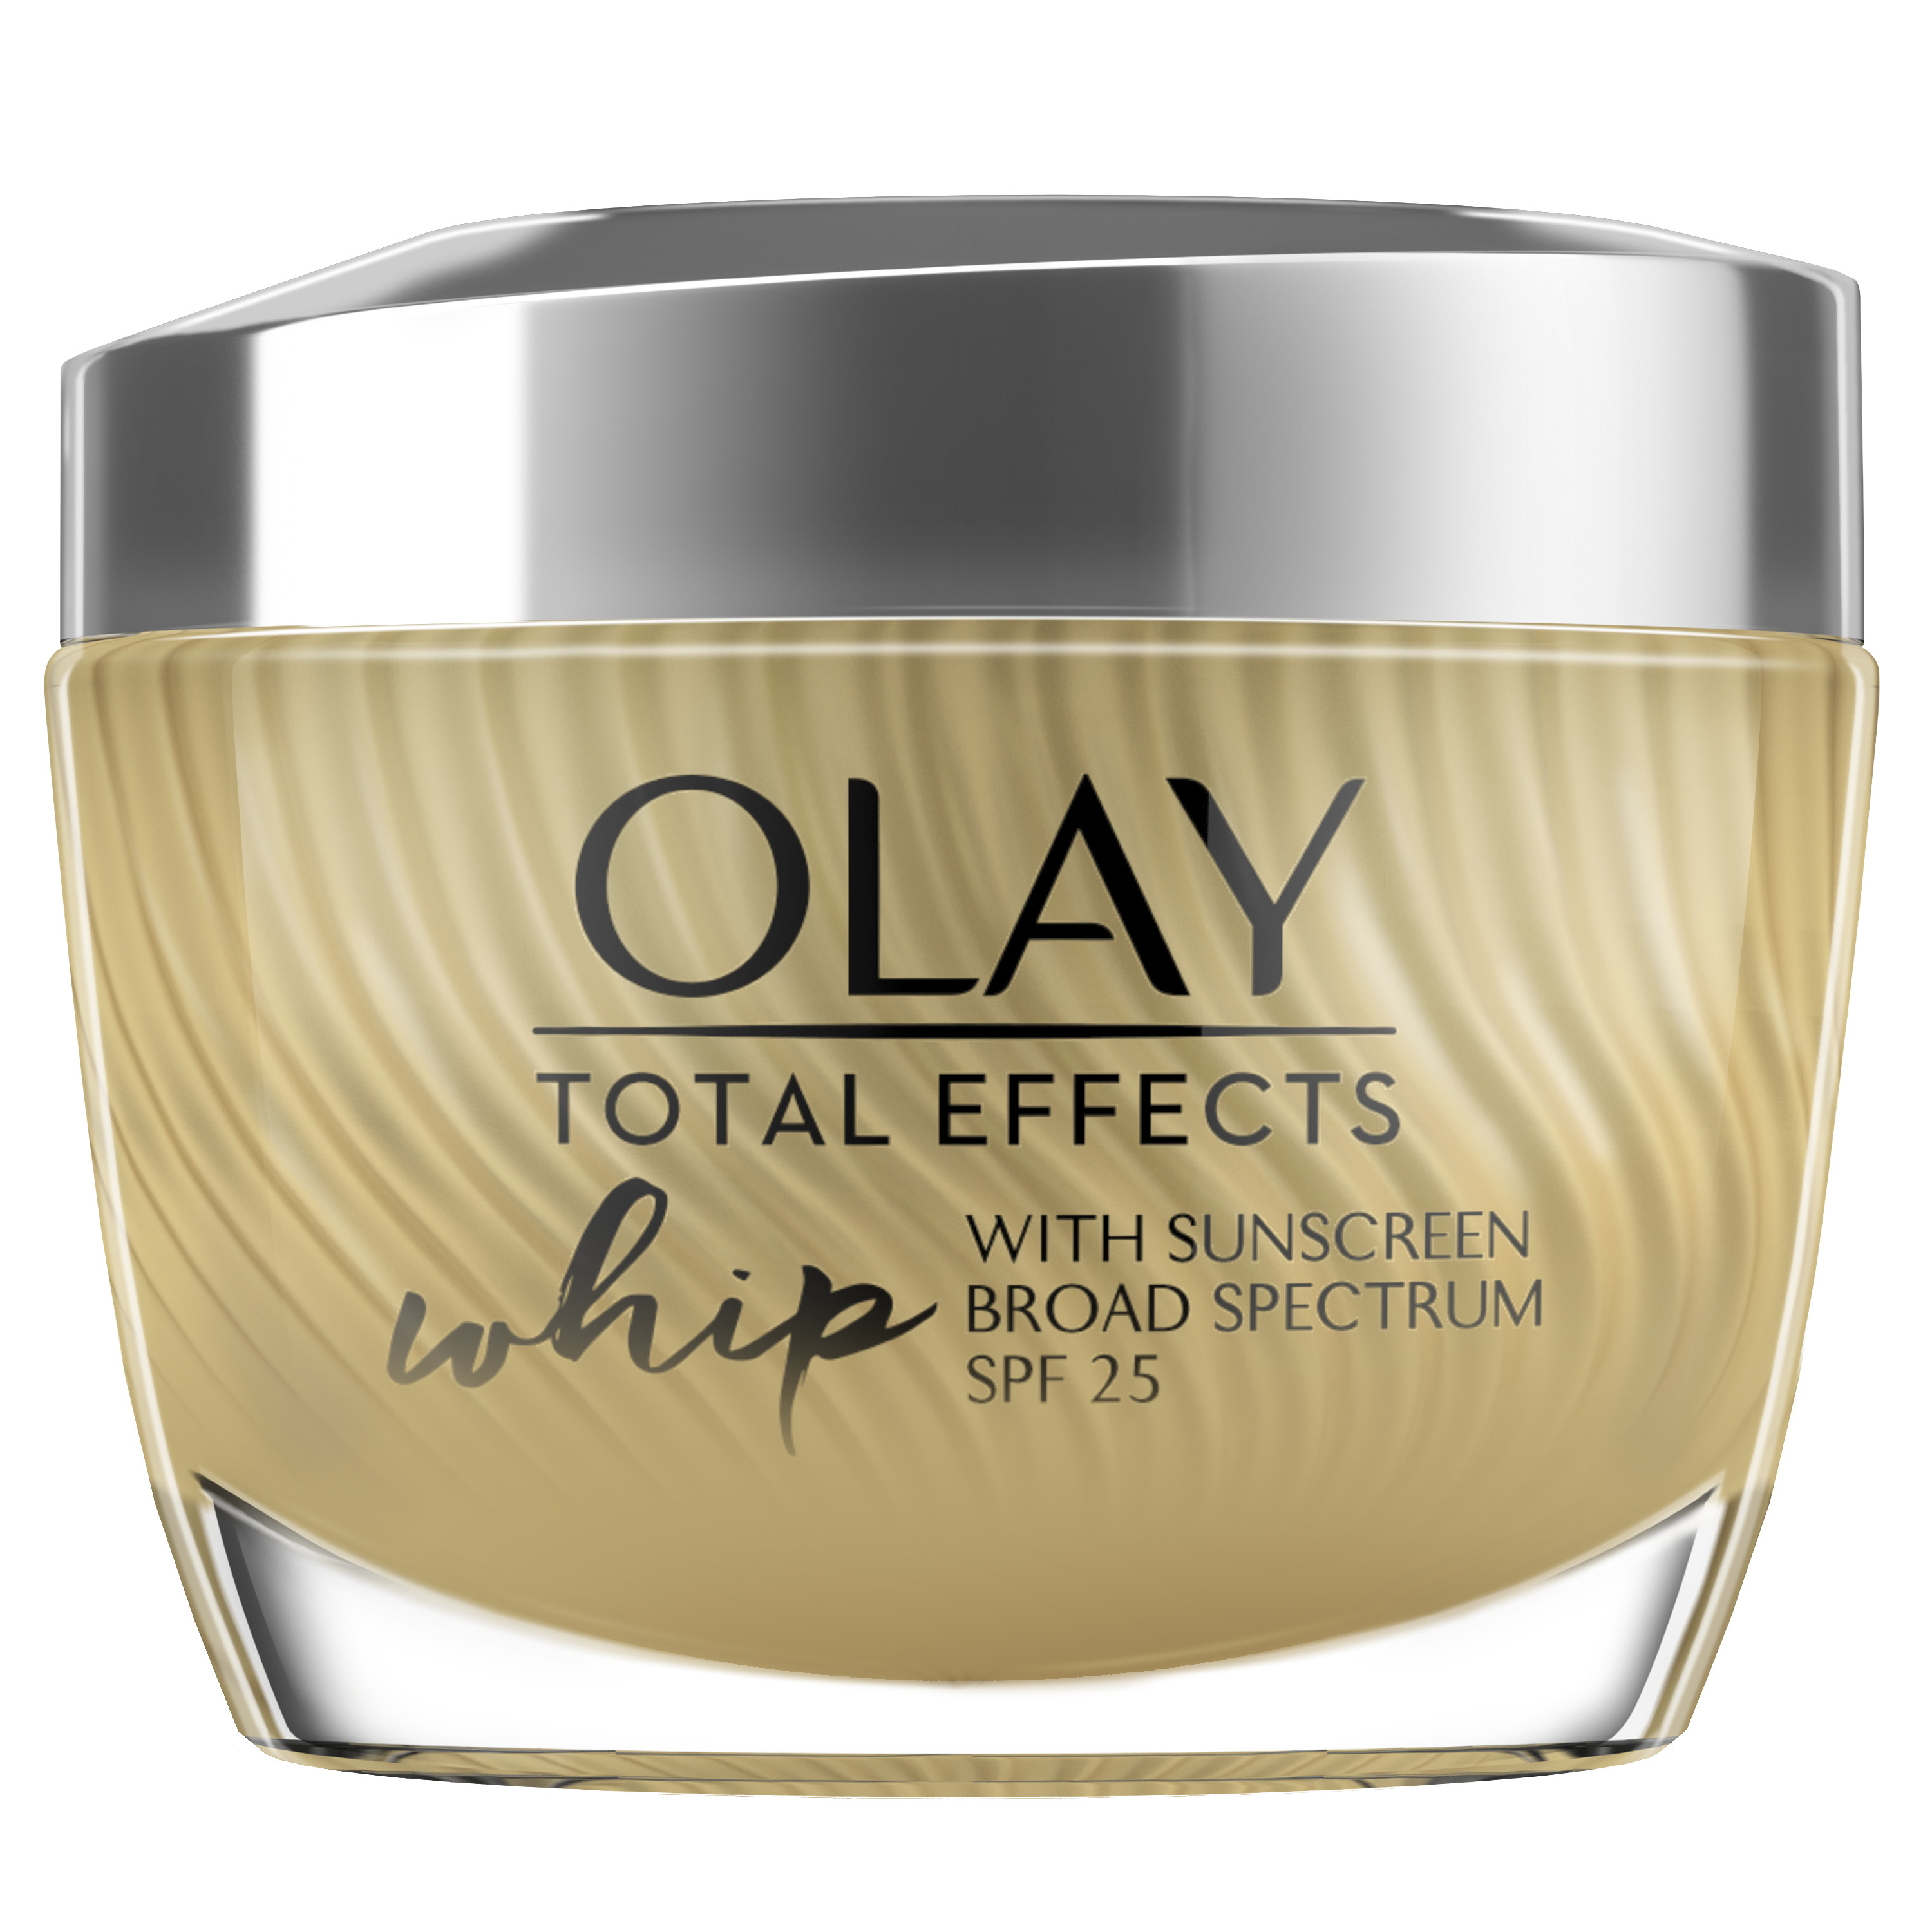 Olay Total Effects Whip Face Moisturizer SPF 25, 1.7 oz - image 1 of 11